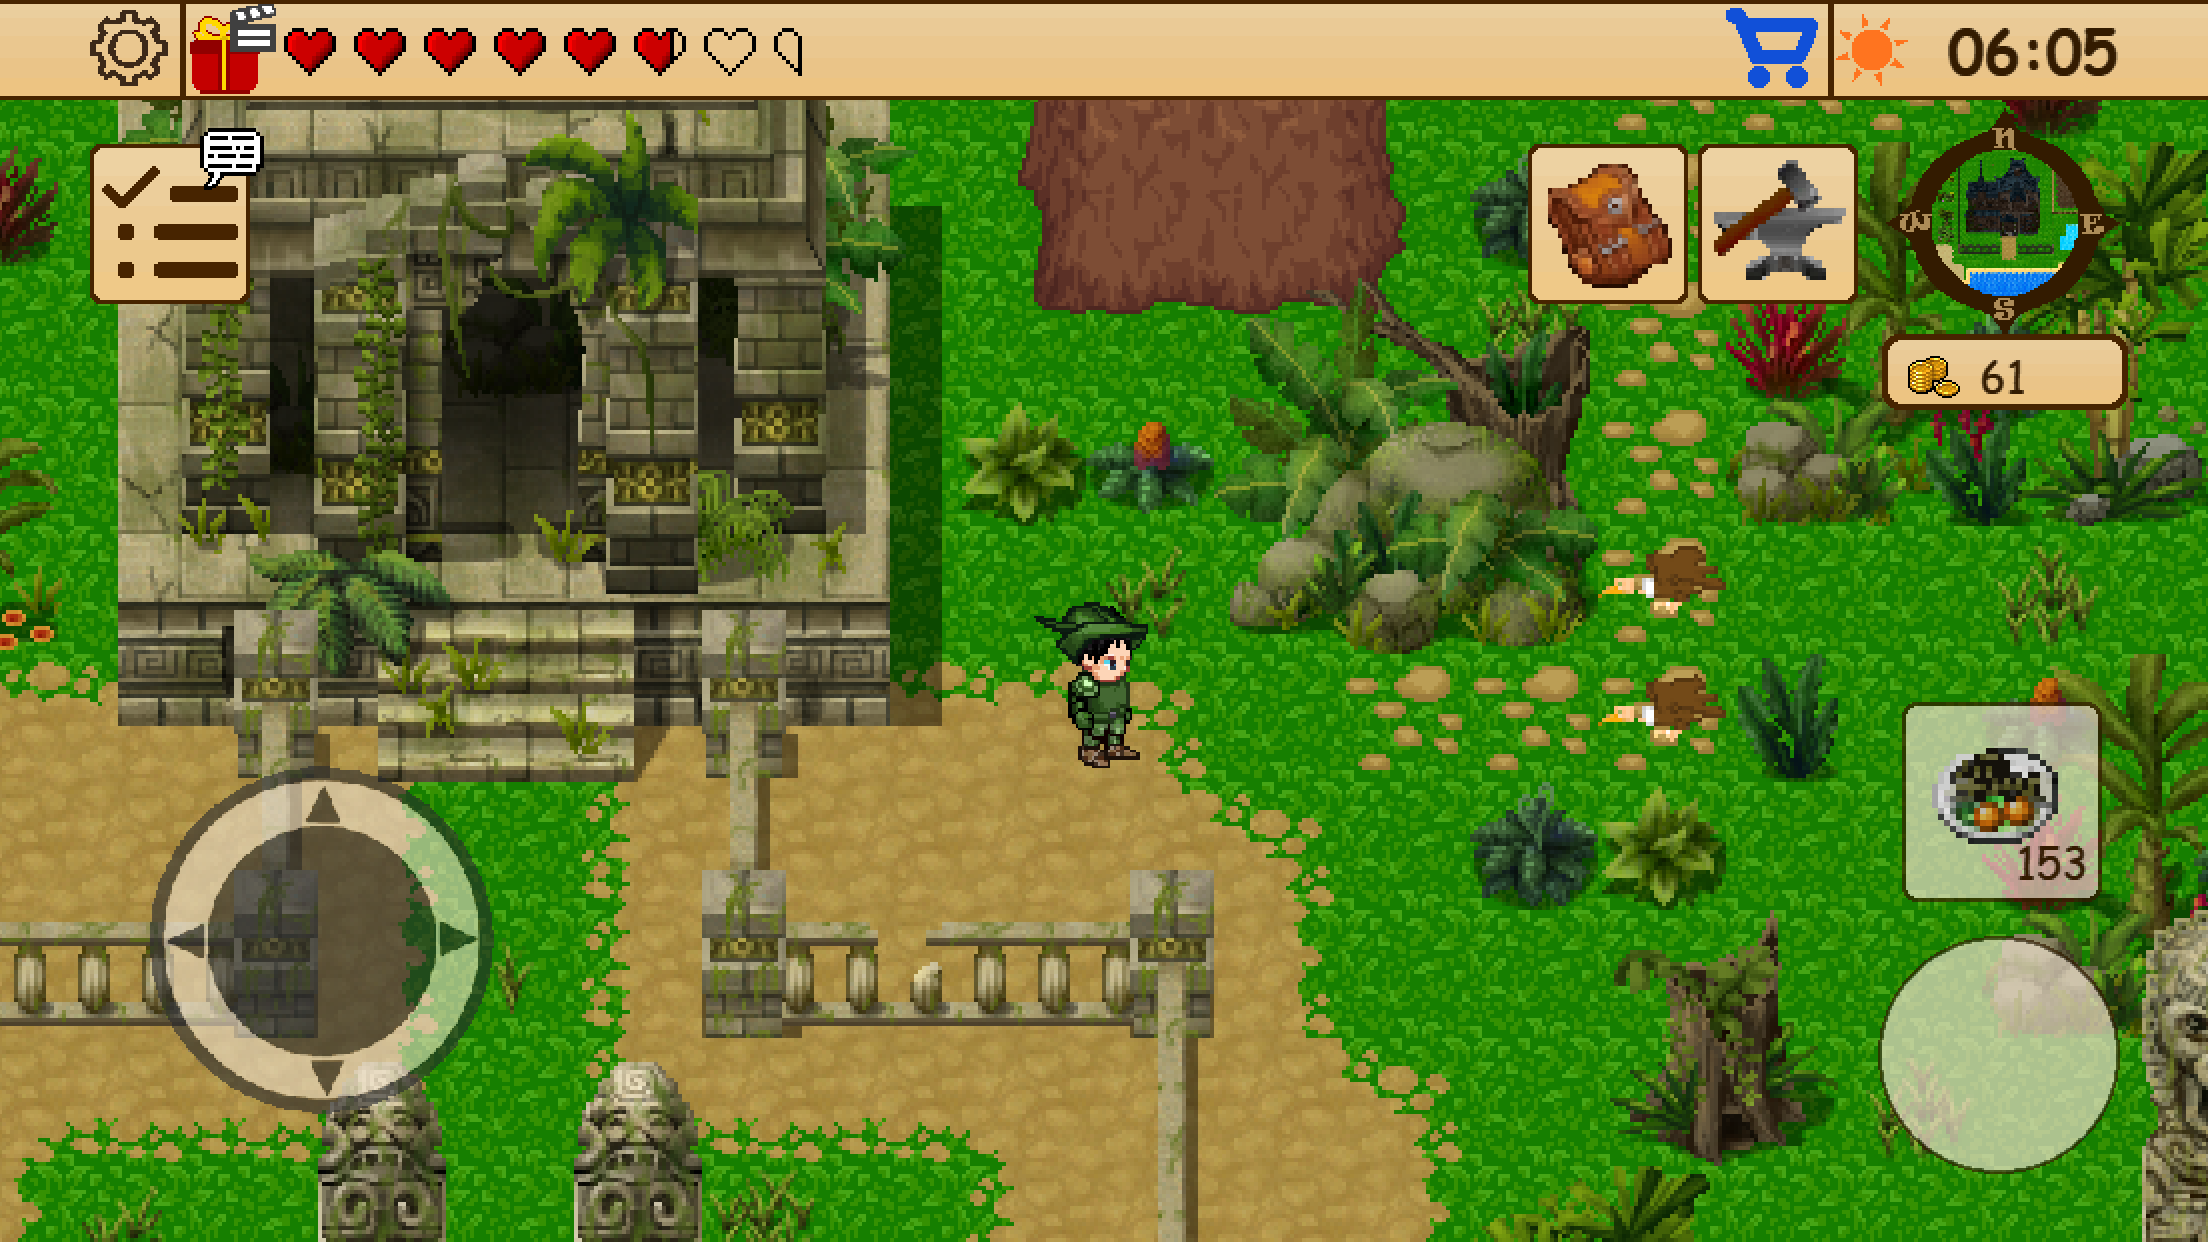 Survival RPG 2:Temple Ruins 2D - Apps on Google Play